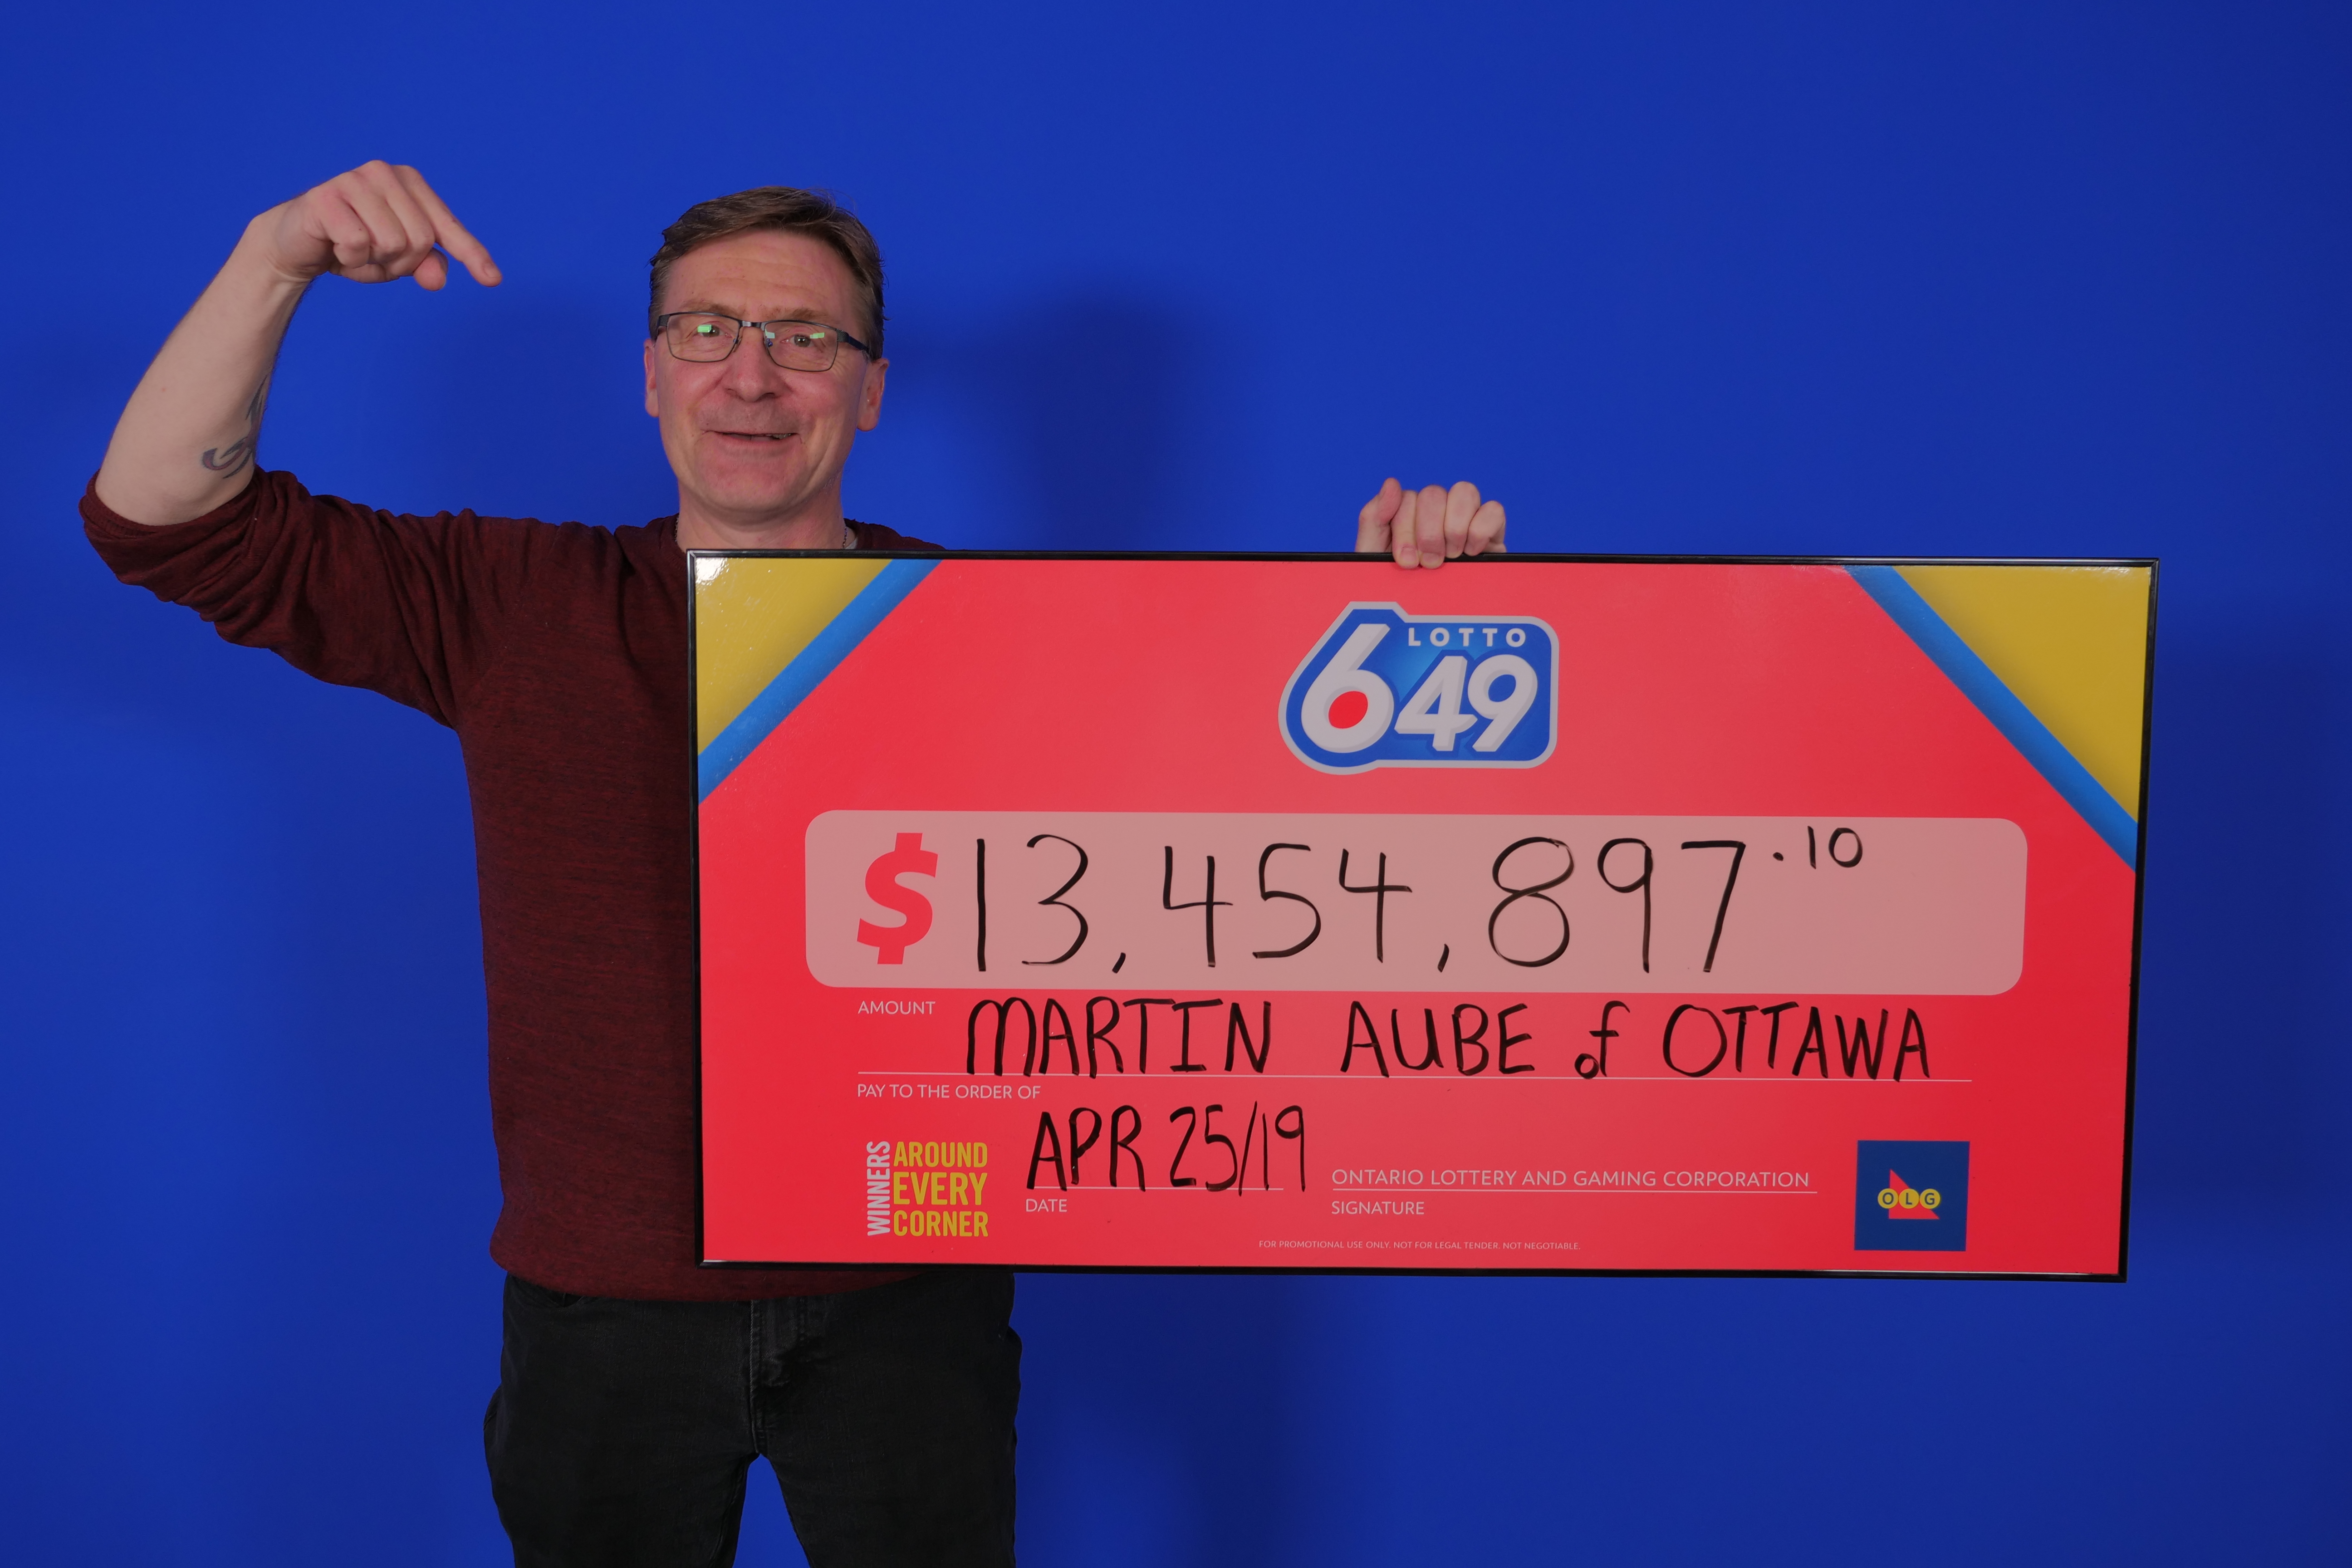 lotto 649 winning numbers april 20 2019